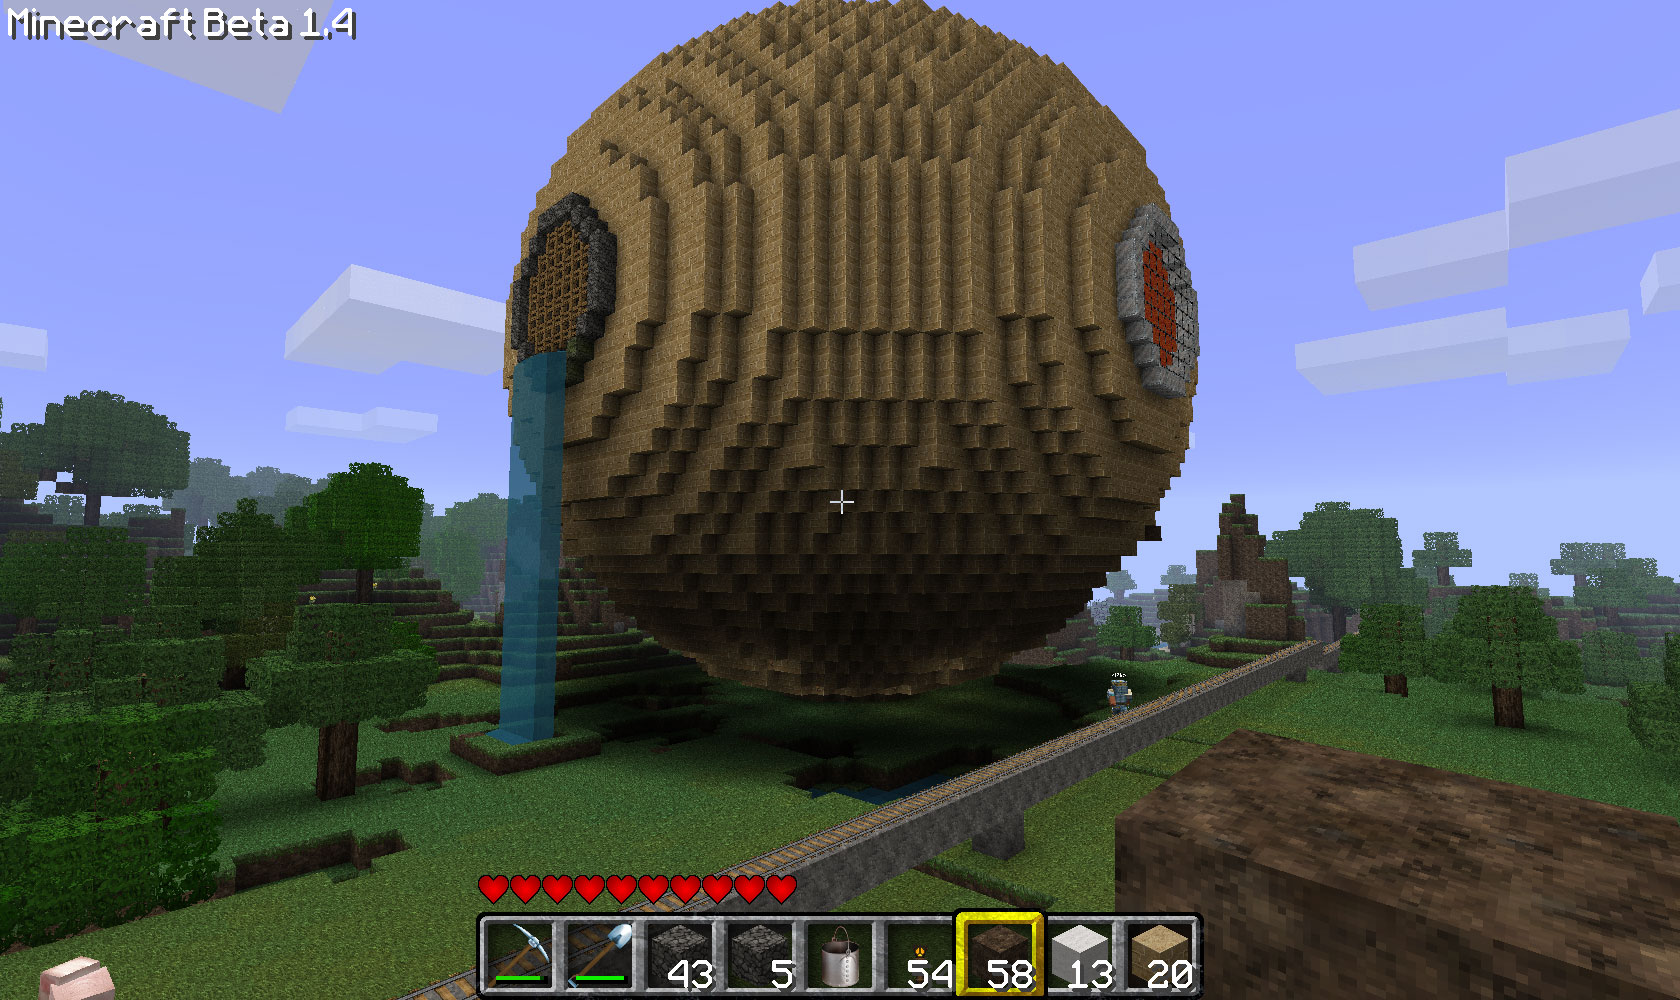 How to build a hollow sphere in Minecraft